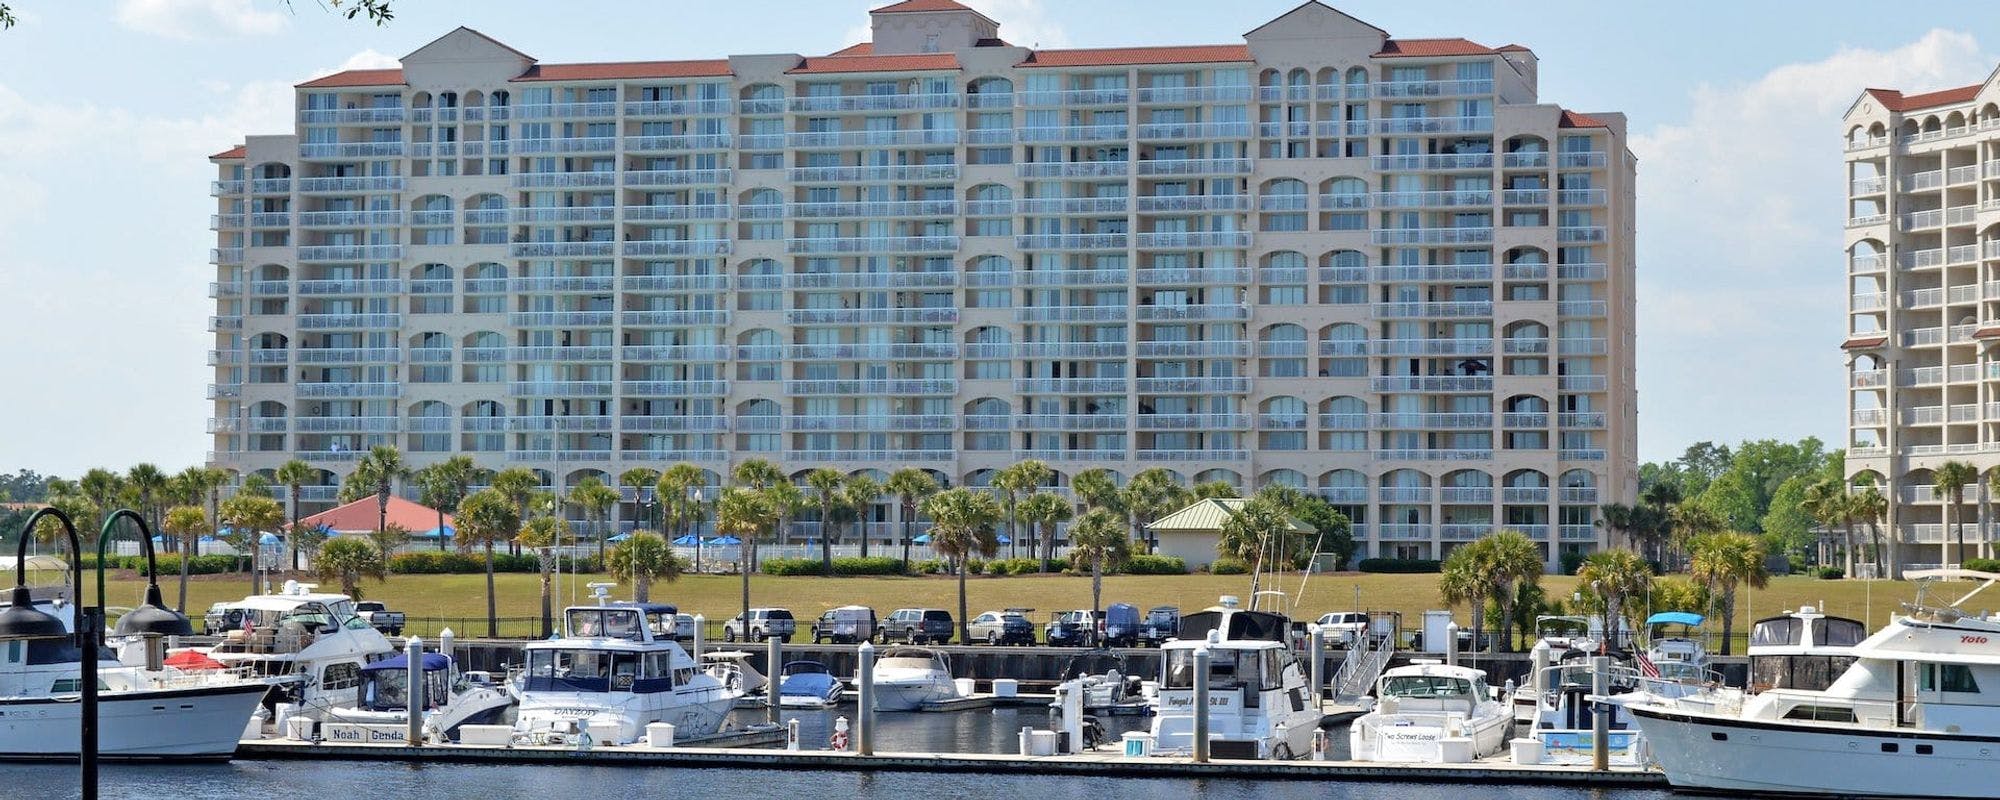 Exterior of Myrtle Beach condo with boats and jet skis 